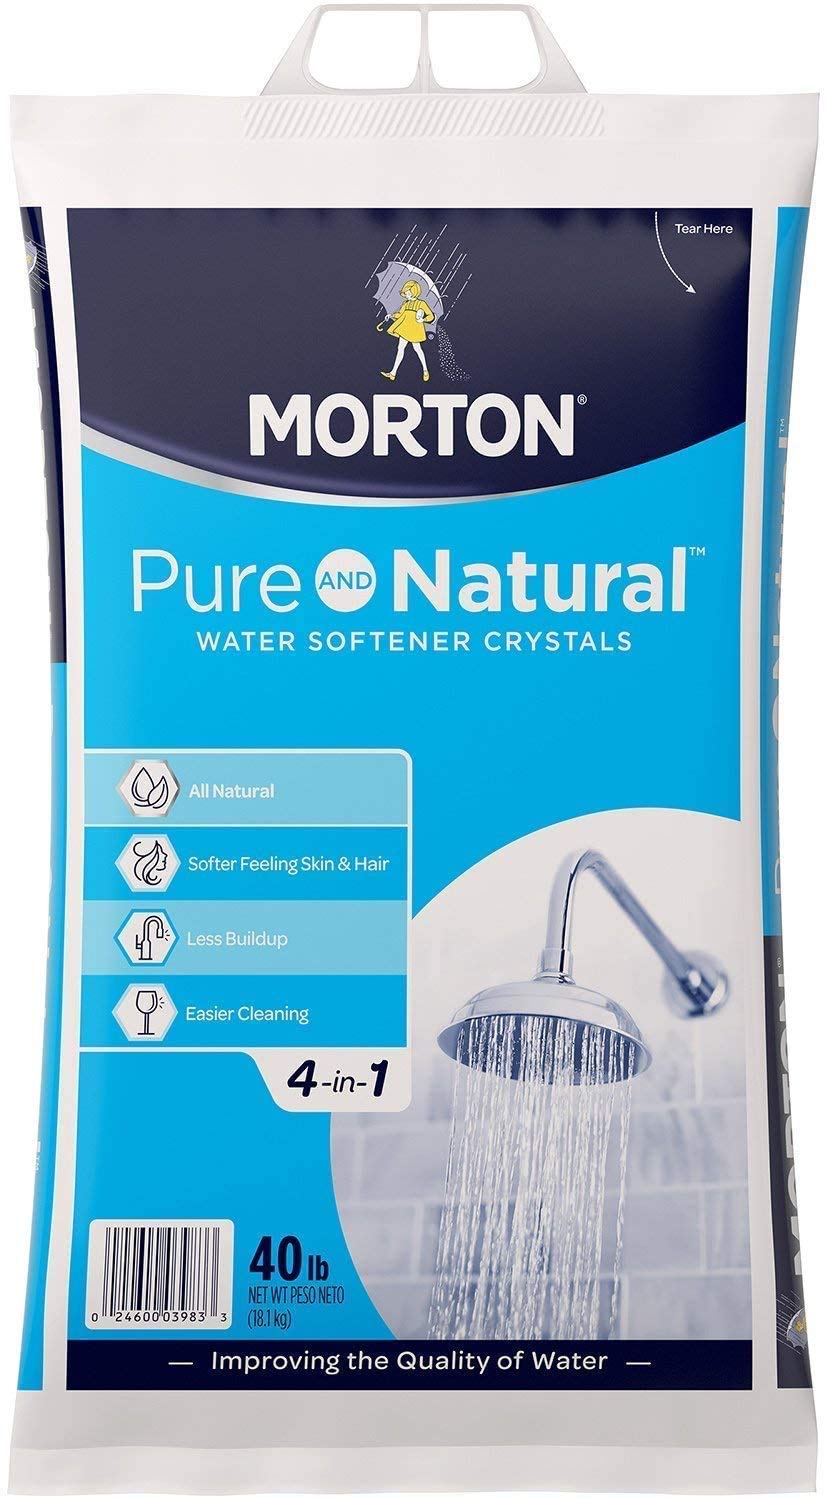 EasyGoProducts Morton Pure & Natural Salt - 4 In 1 Water Softening Crystals - Soft Water Softener Salt - 40 Pounds